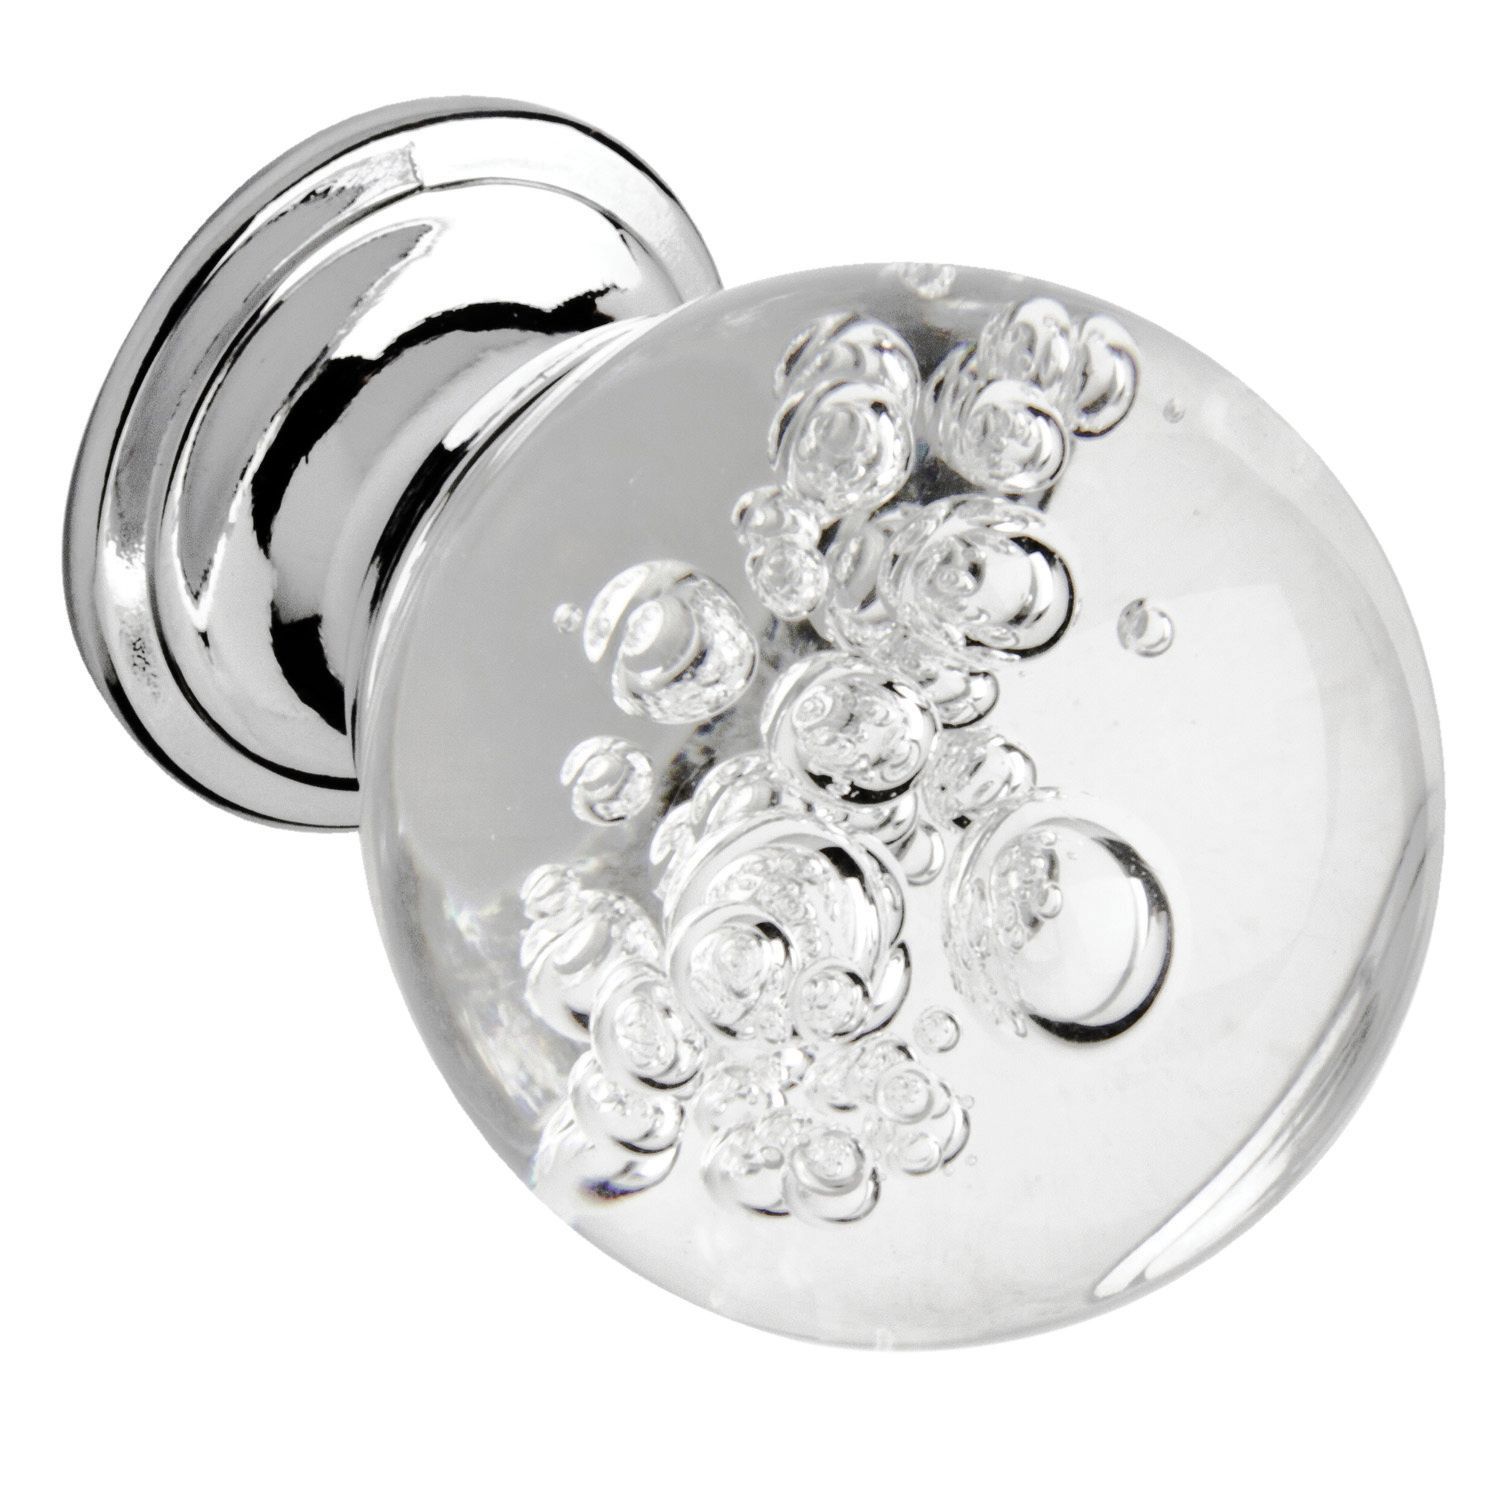 Image of Wickes Bubbled 30mm Glass Door Knob - Chrome - Pack of 4